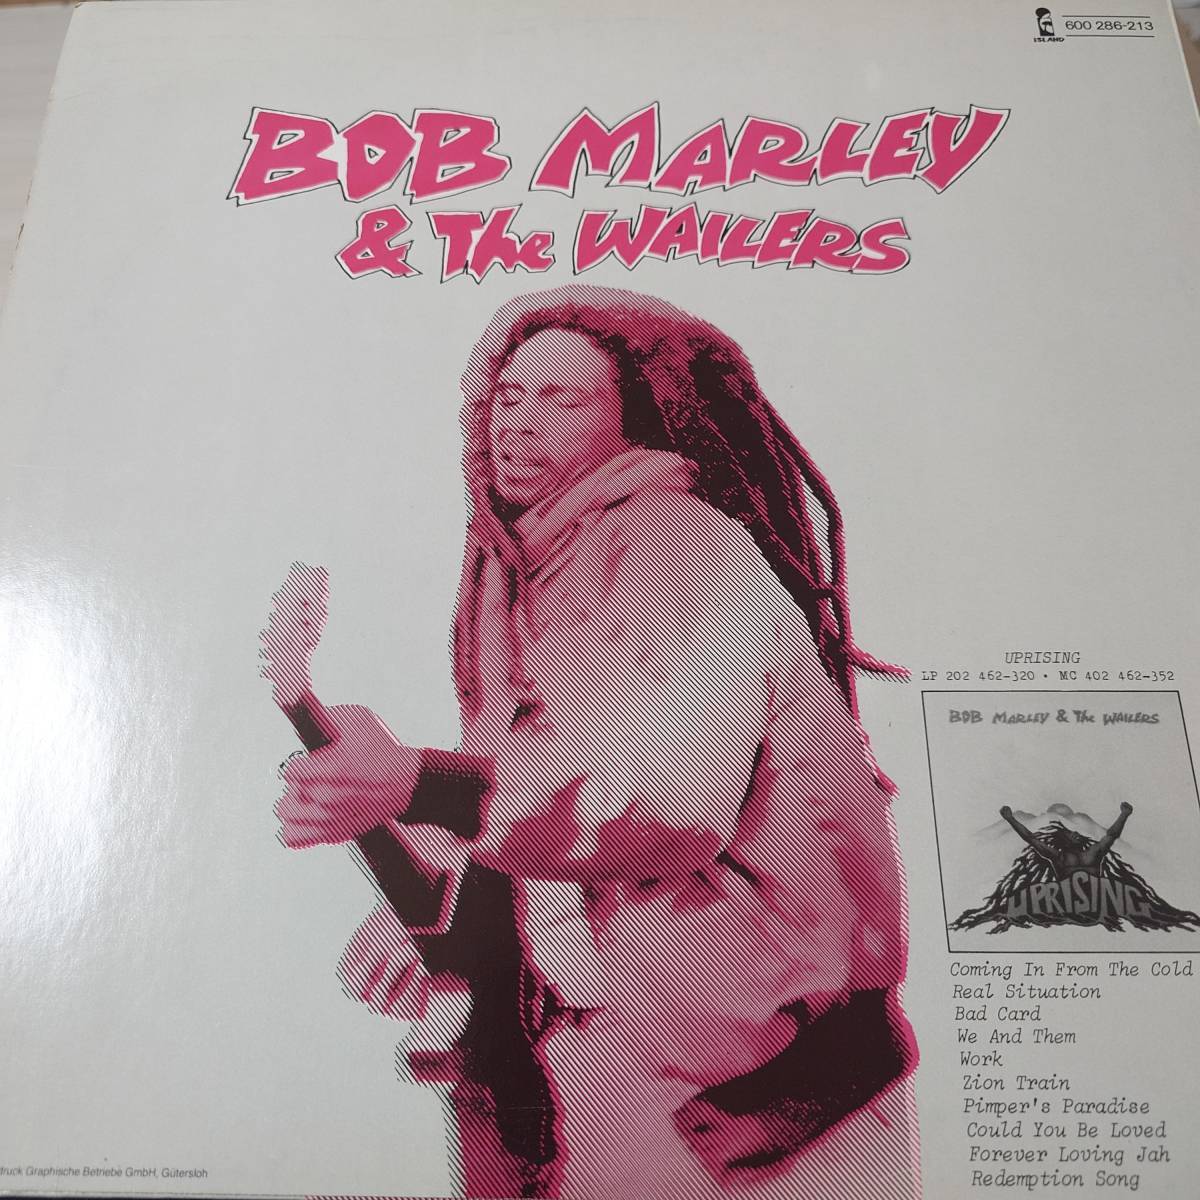 Bob Marley & The Wailers - Three Little Birds / Every Need Got An Ego To Feed // Island Records 12inch / Roots_画像2